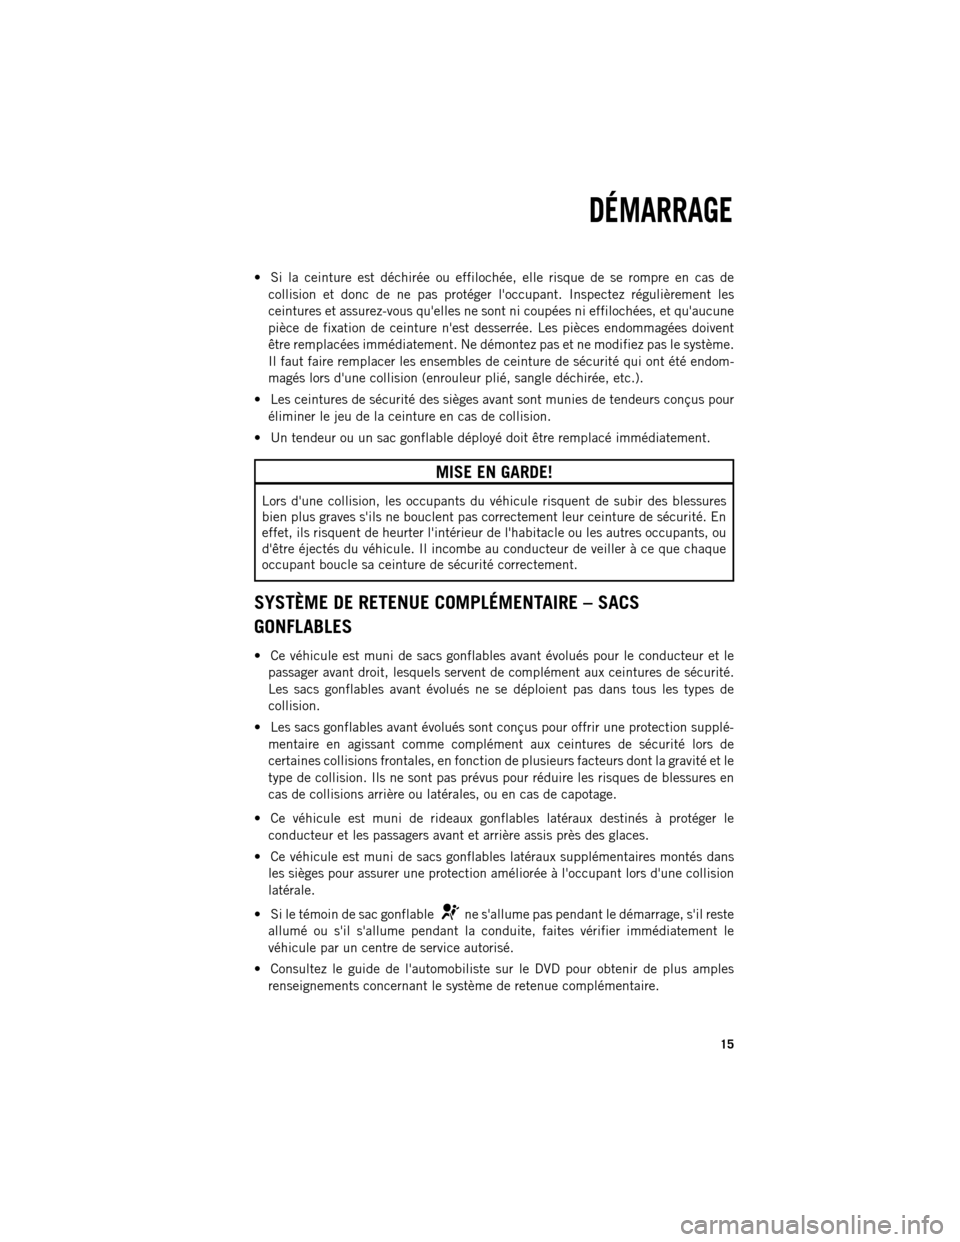 Ram 1500 2013  Guide dutilisateur (in French)  Si la ceinture est déchirée ou effilochée, elle risque de se rompre en cas de
collision et donc de ne pas protéger loccupant. Inspectez régulièrement les
ceintures et assurez-vous quelles ne